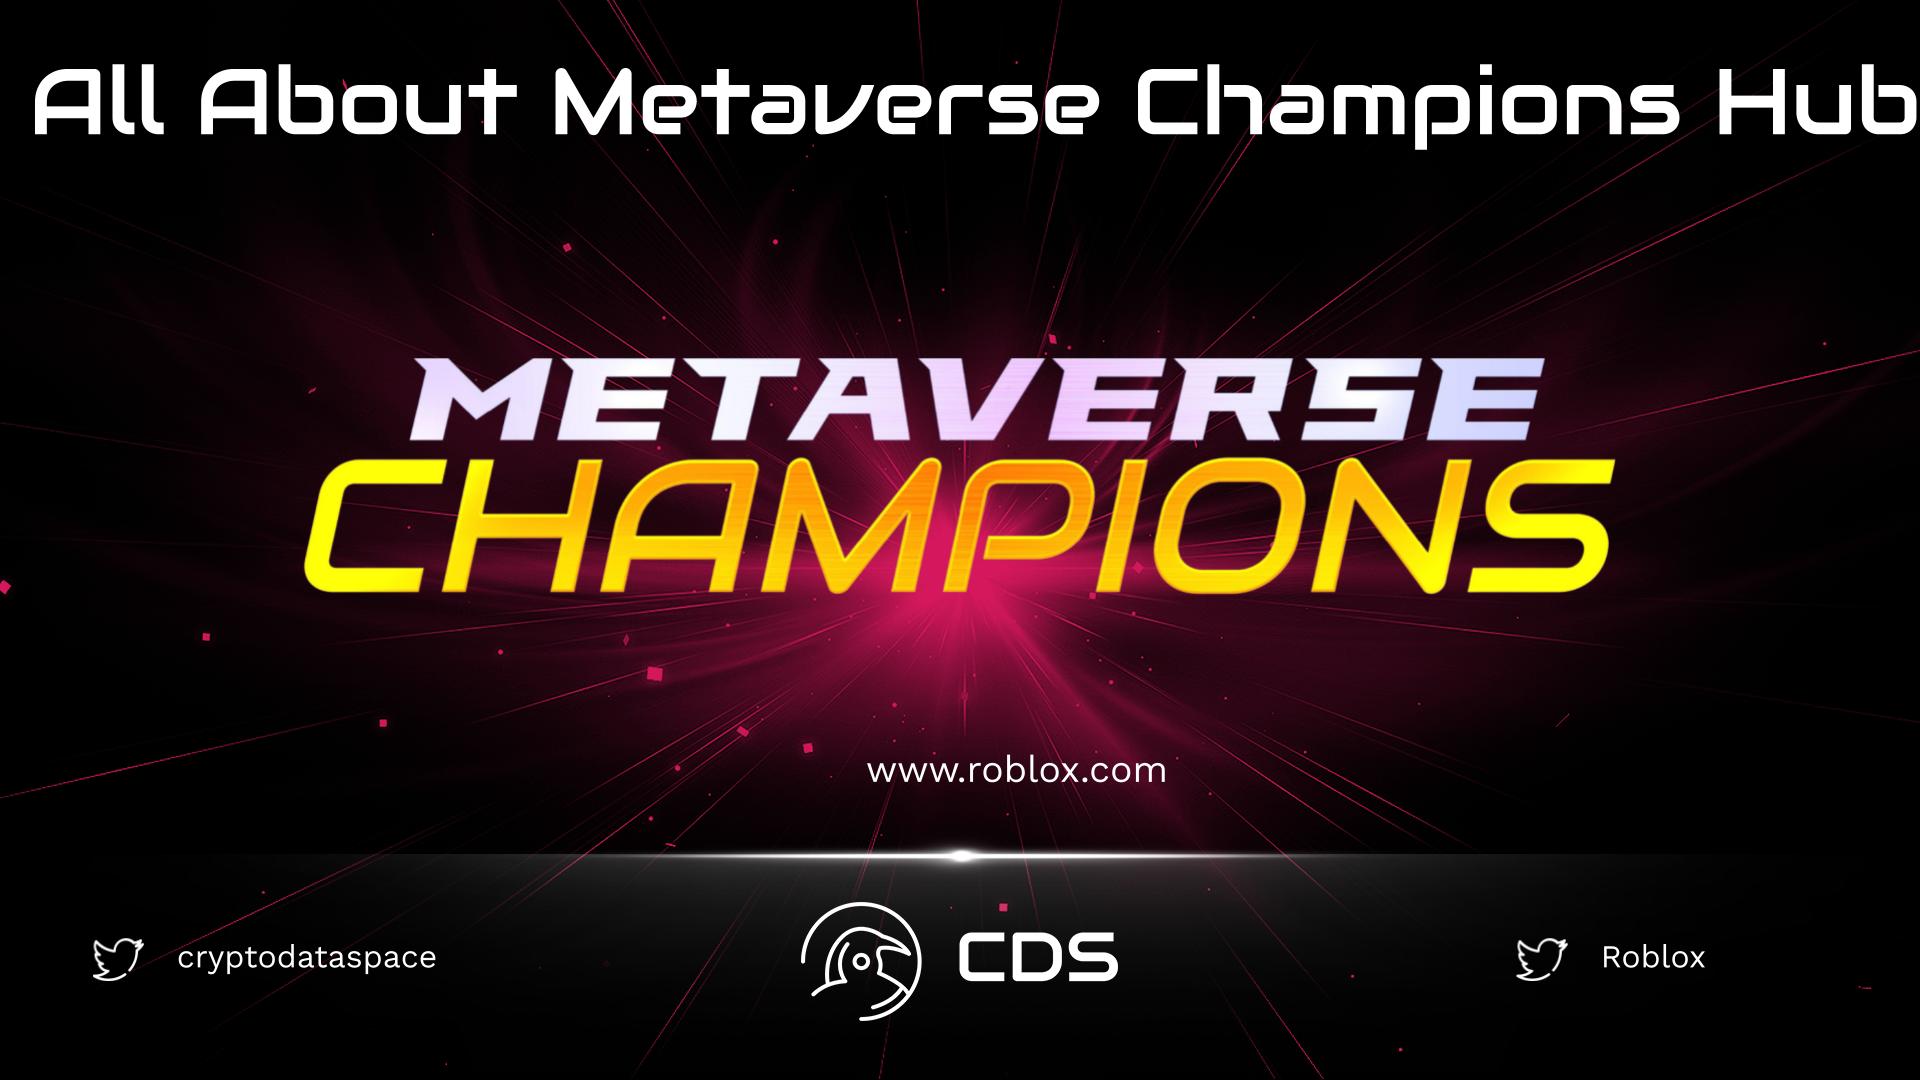 All About Metaverse Champions Hub